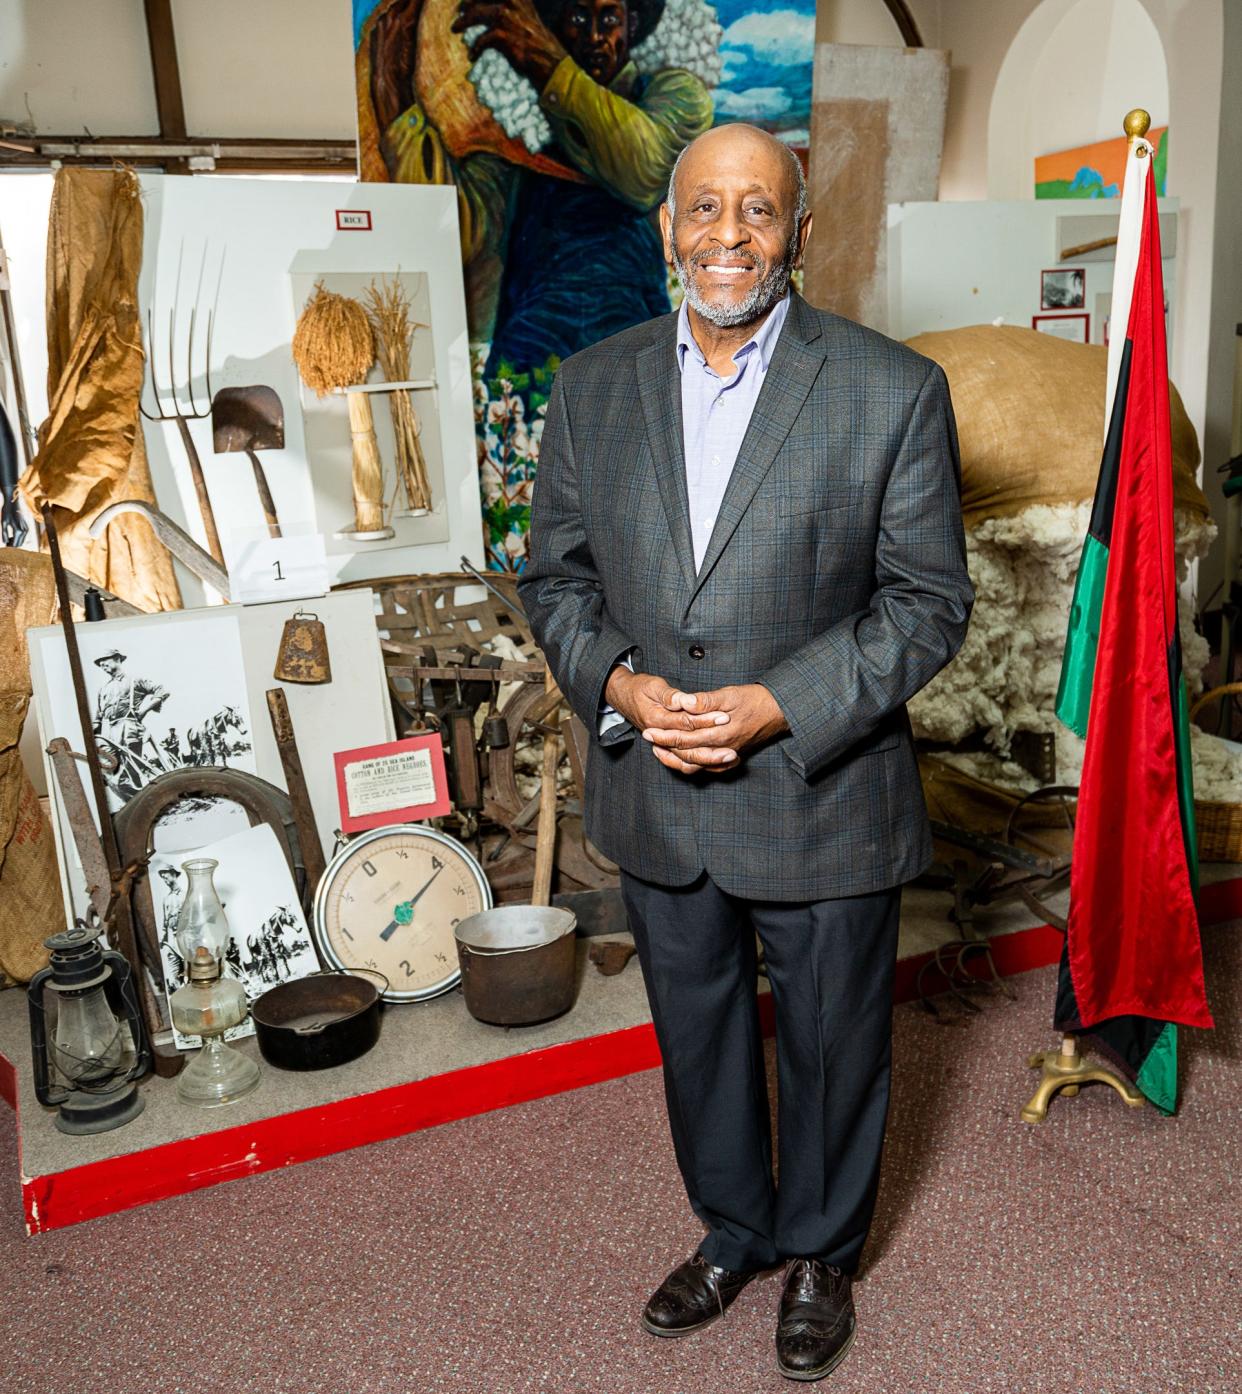 Executive Director of the Wisconsin Black Historical Society Clayborn Benson poses for a portrait inside the society's museum on April 29, 2023 in Milwaukee.